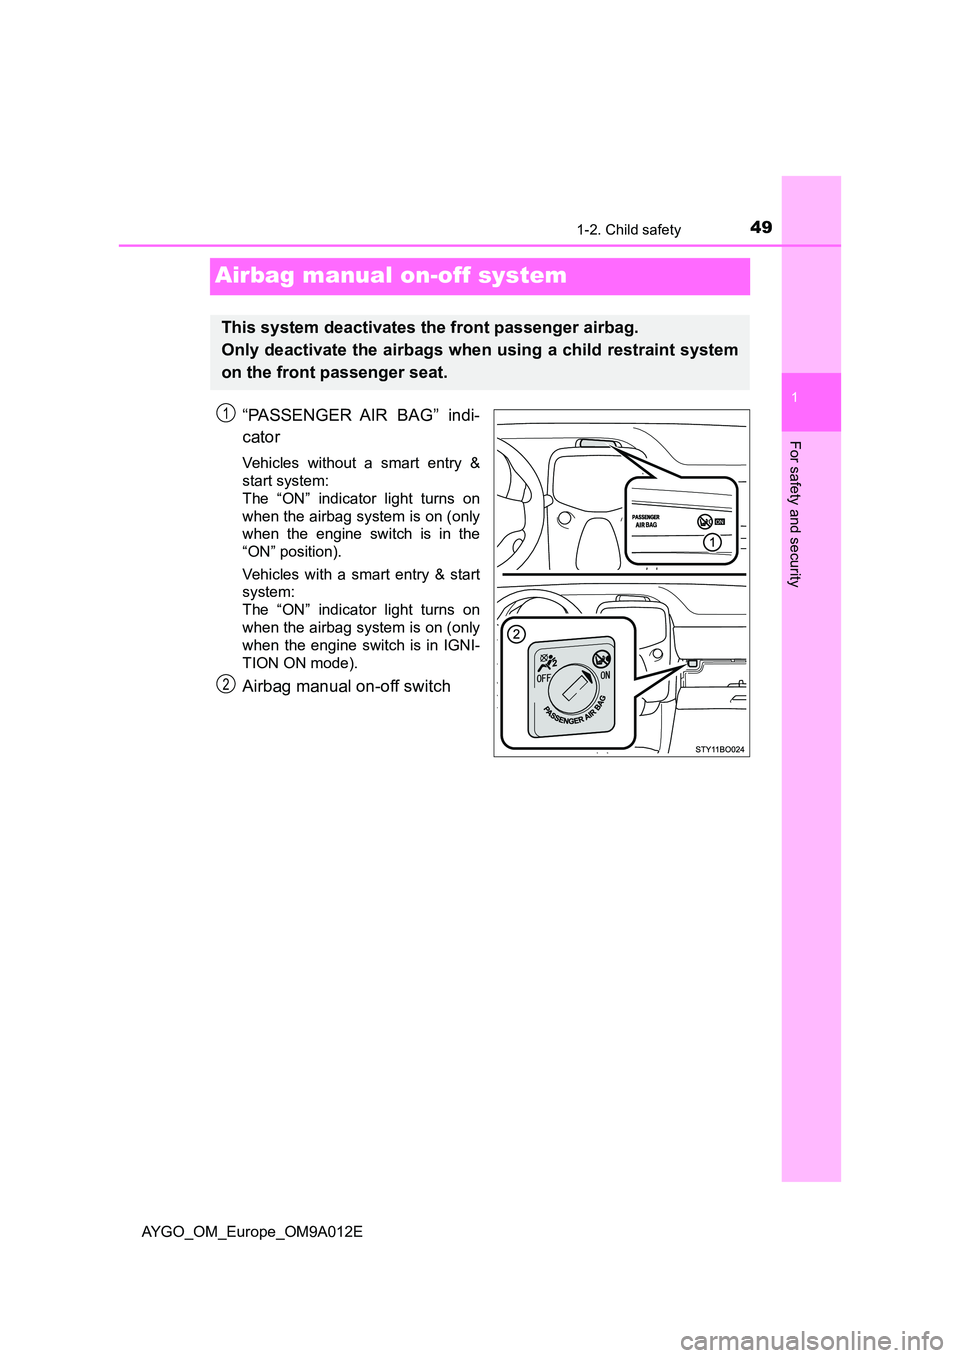 TOYOTA AYGO 2021  Owners Manual 491-2. Child safety
1
For safety and security
AYGO_OM_Europe_OM9A012E
Airbag manual on-off system
“PASSENGER AIR BAG” indi- 
cator
Vehicles without a smart entry & 
start system:  
The “ON” in